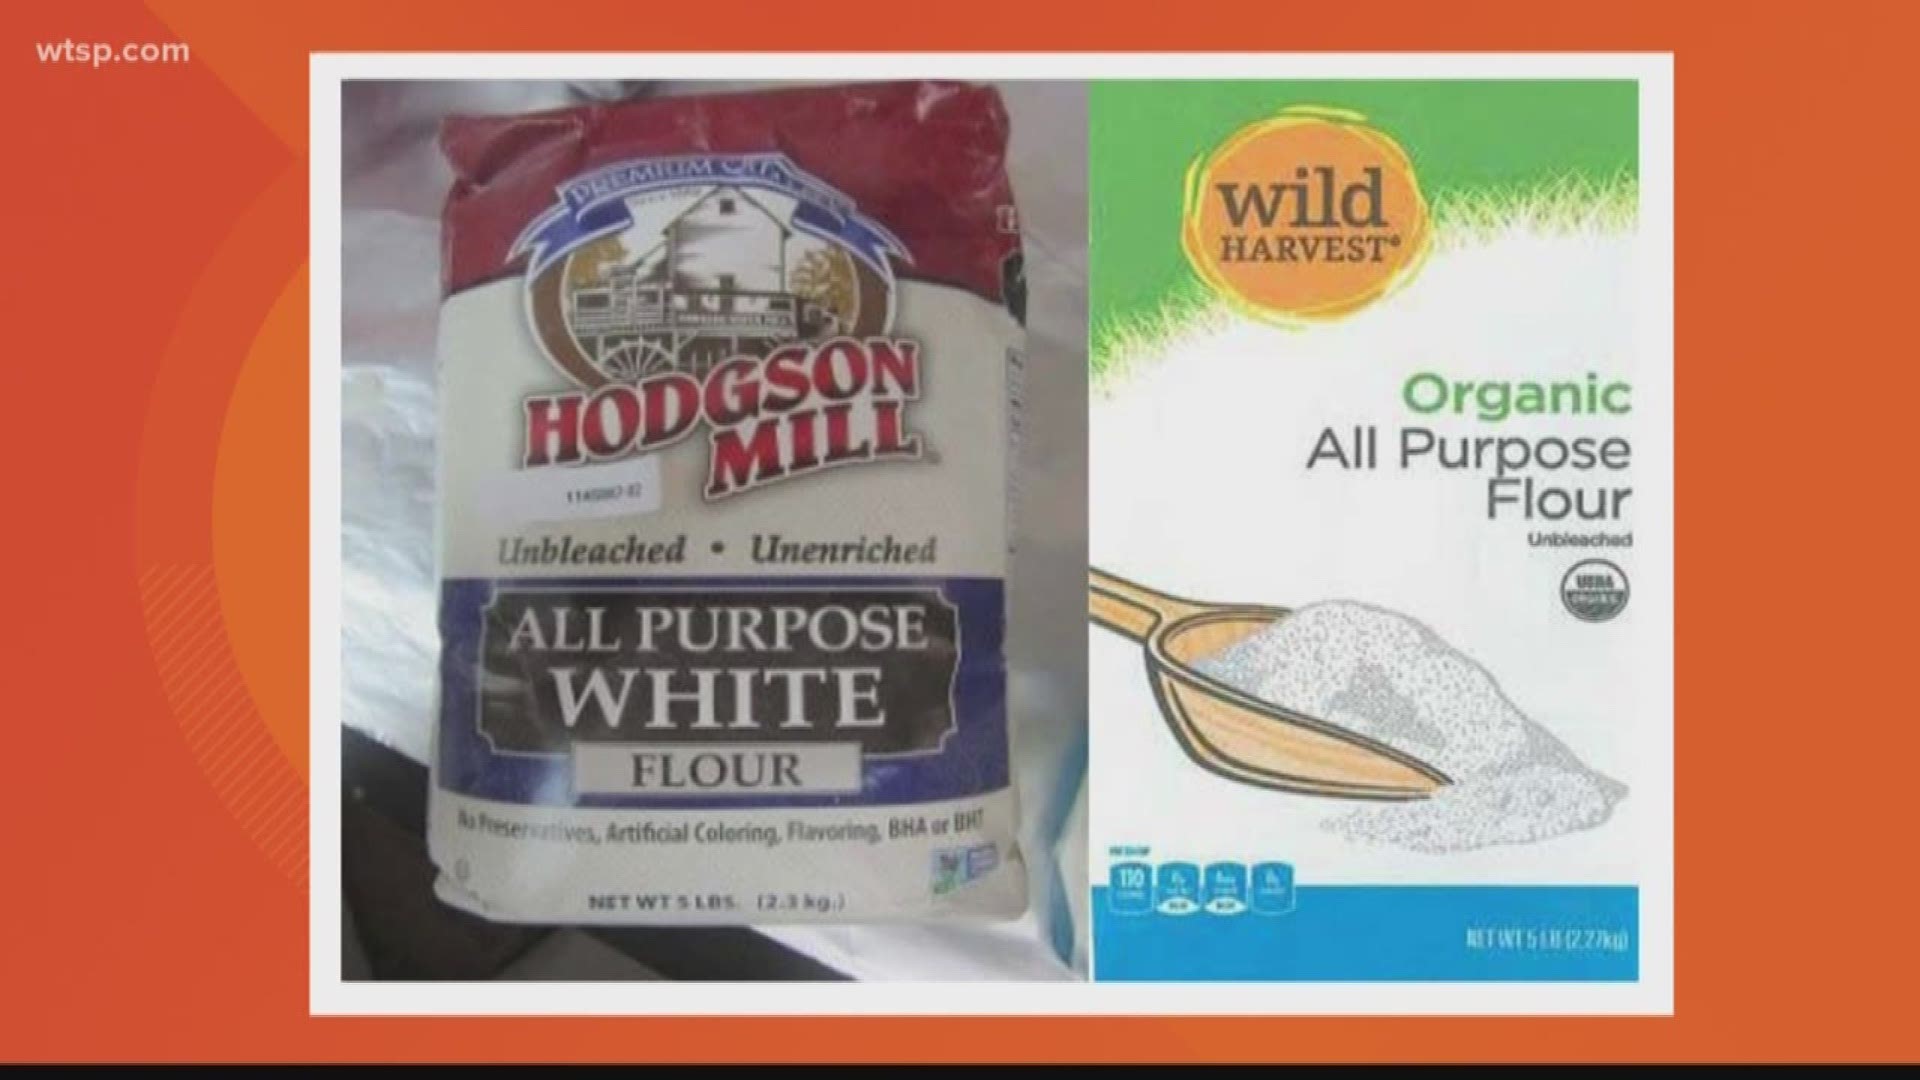 Hodgson Mill and Wild Harvest have recalled certain bags of flour because of possible E. coli contamination.